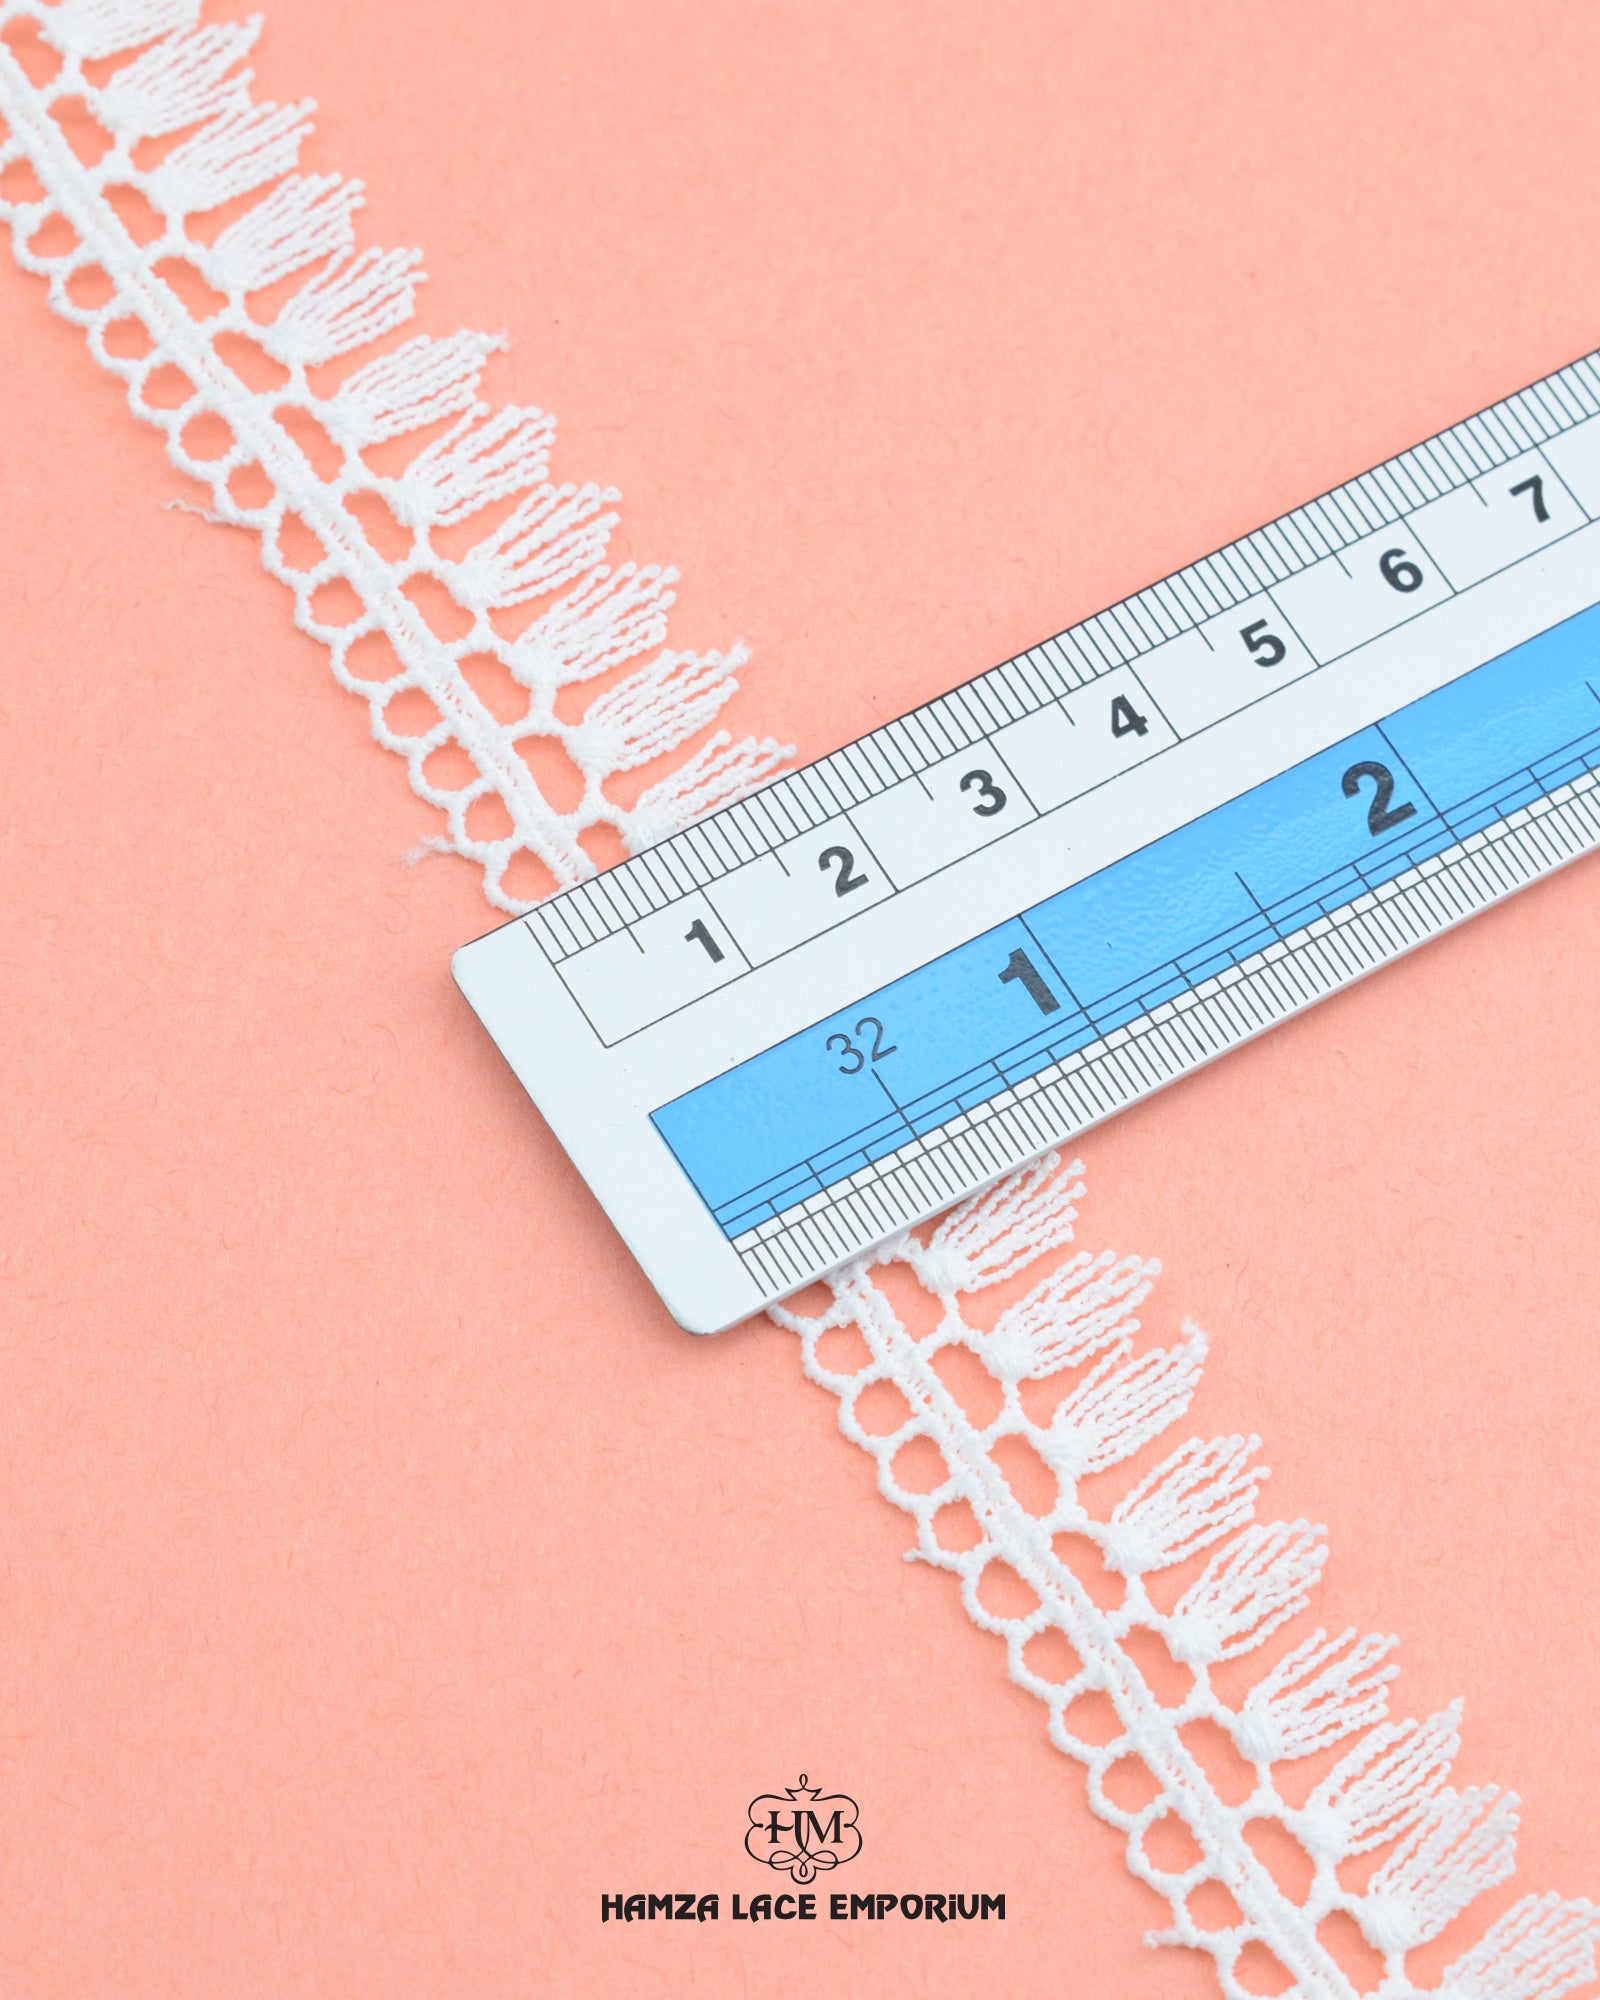 The size of the 'Edging Jhalar Lace 2537' is given as '0.75' inches by placing a ruler on it